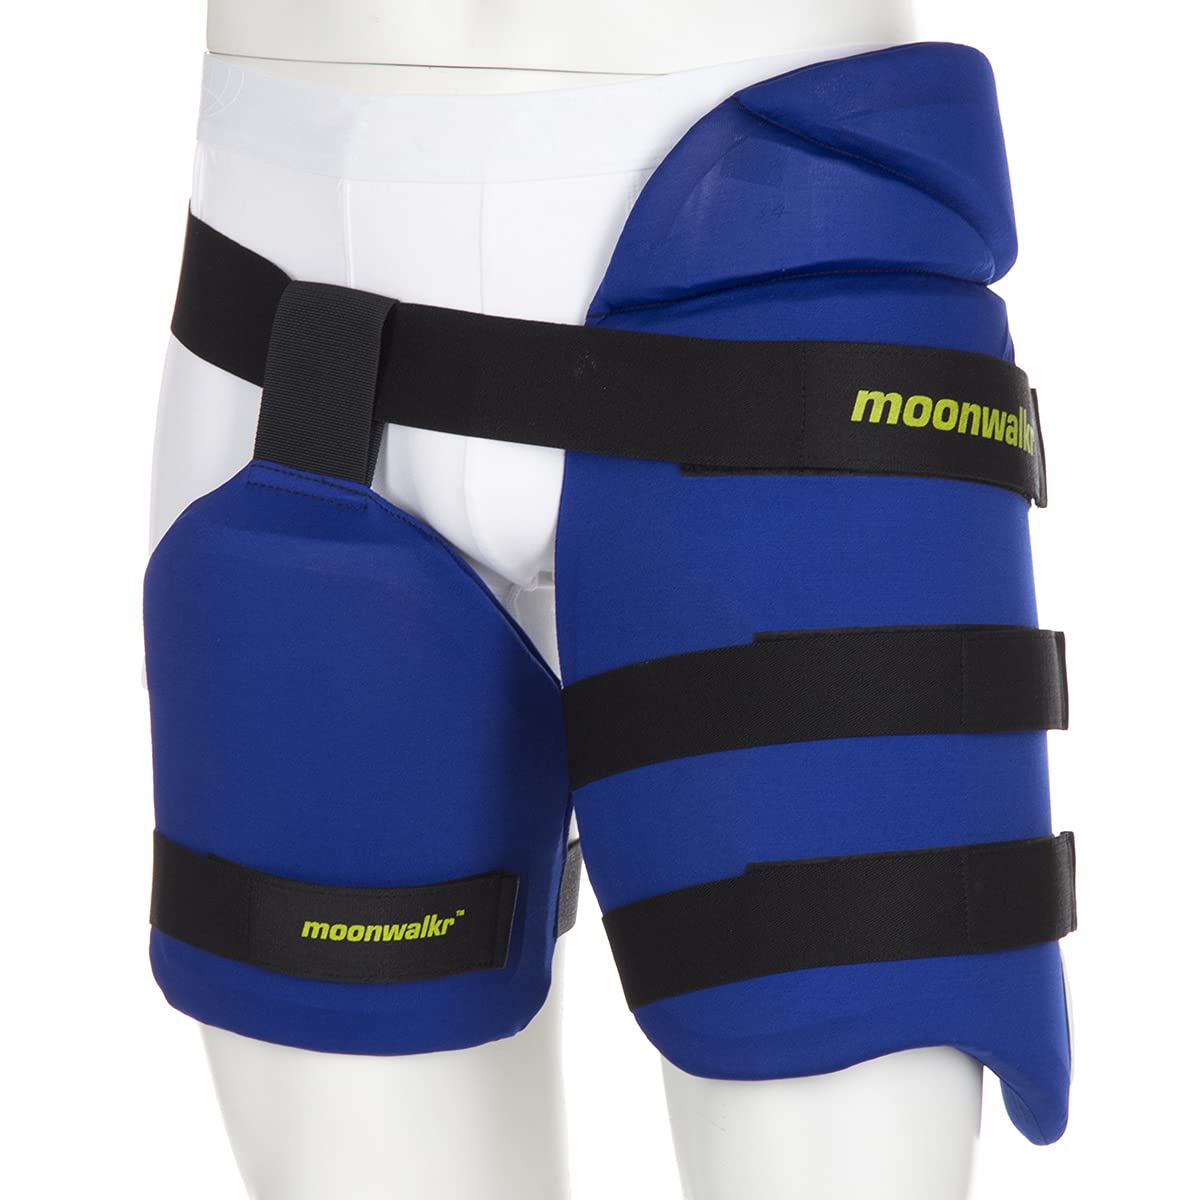 Moonwalkr ENDOS Thigh Guards for boys and men in blue, integrated dual thigh guard with 3D protection design for inner and outer thigh regions. Made from lightweight composite materials for superior protection, with a hinged design for a flexible fit and maximum mobility, perfect for cricket professionals and enthusiasts.